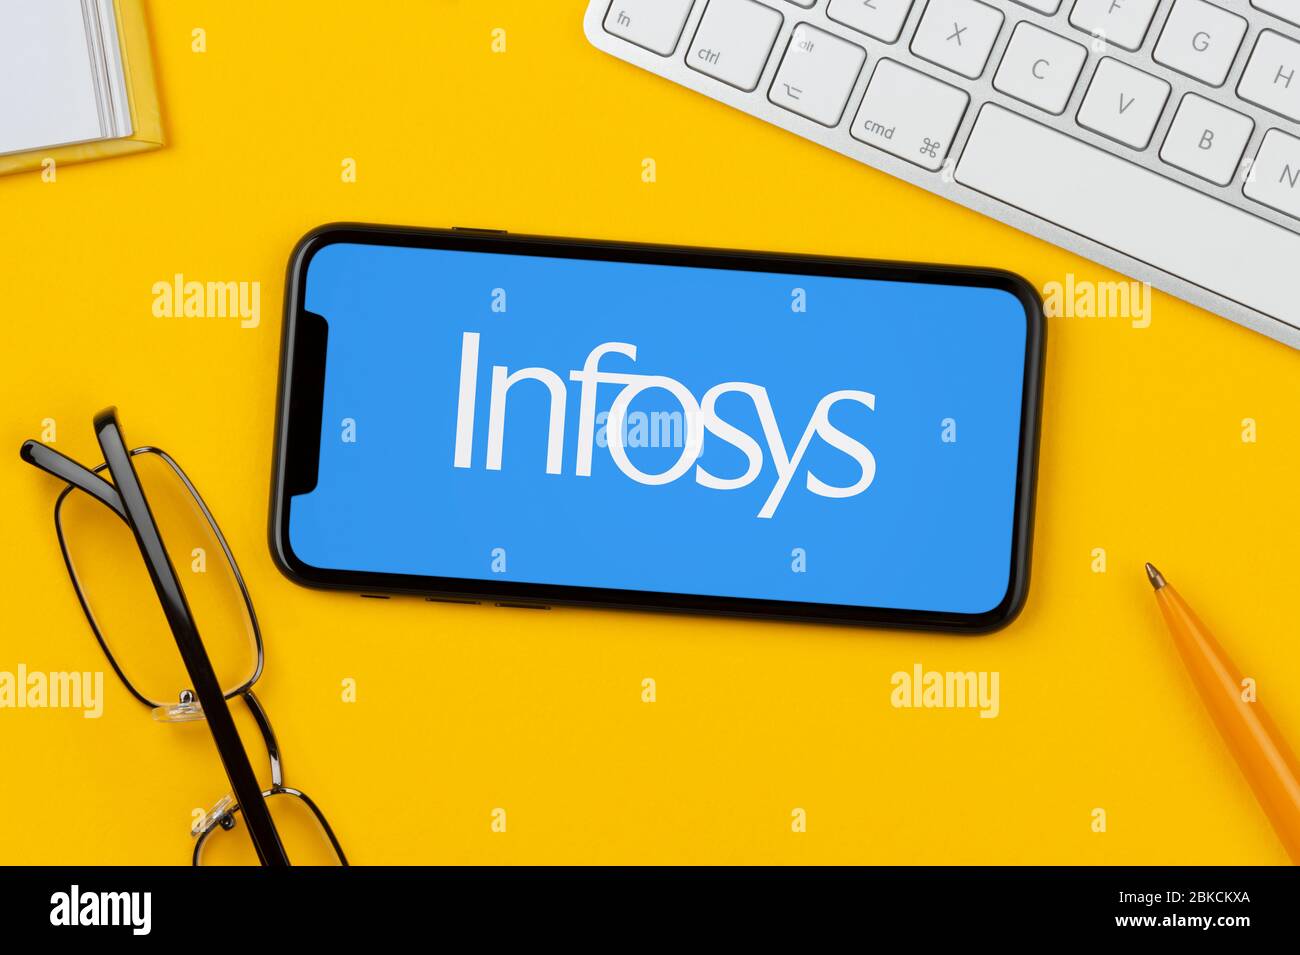 A smartphone showing the Infosys logo rests on a yellow background along with a keyboard, glasses, pen and book (Editorial use only). Stock Photo